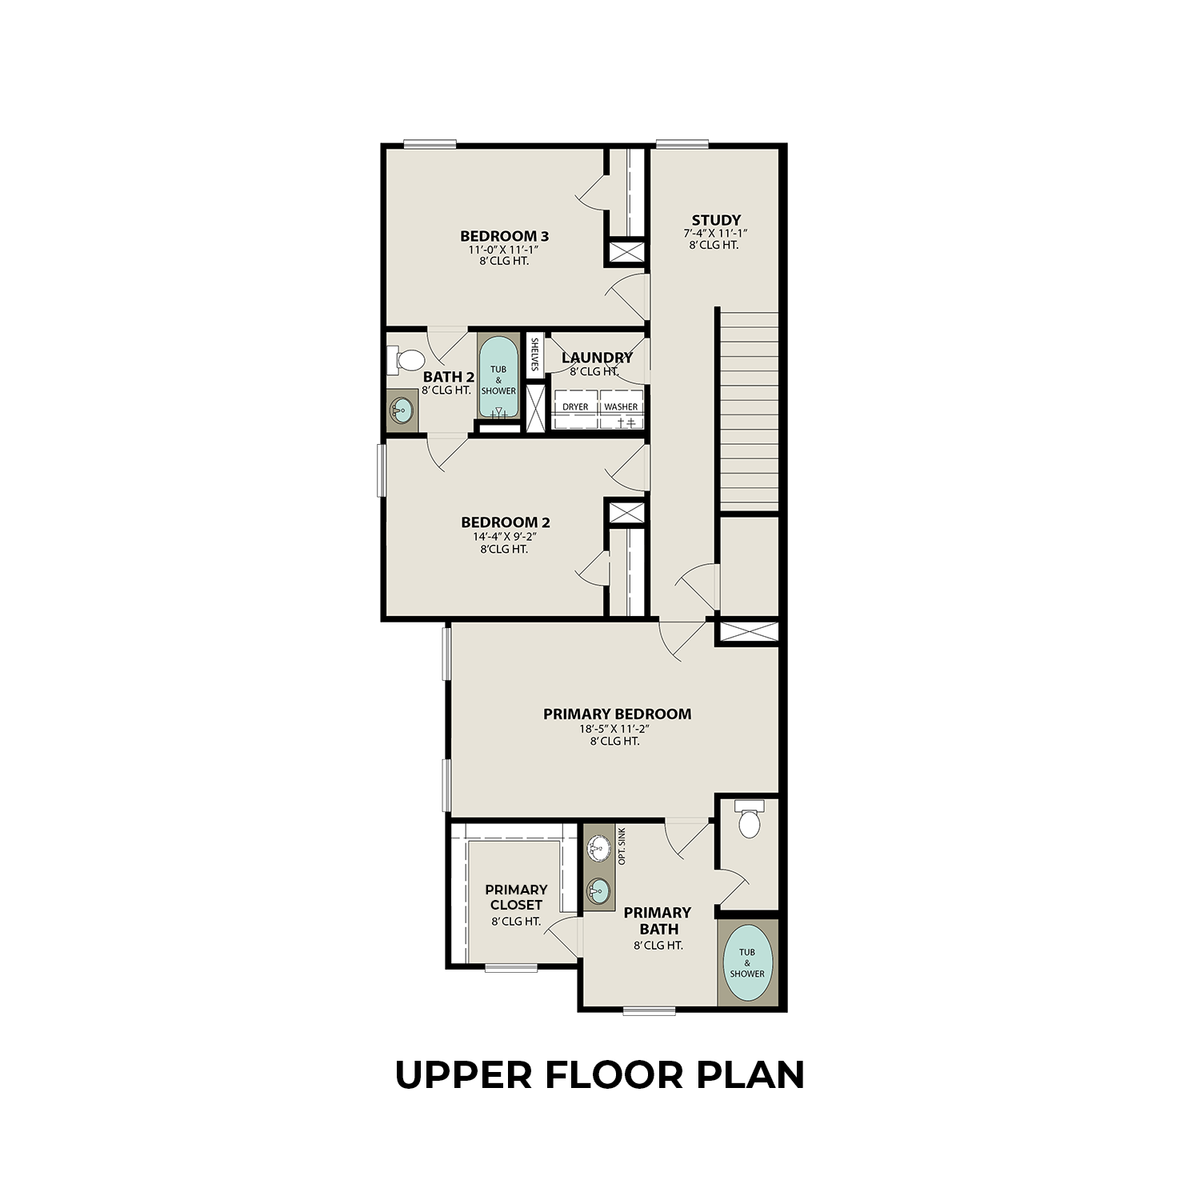 2 - The Lily B floor plan layout for 5263 Shallowhurst Lane in Davidson Homes' Haven at Kieth Harrow community.